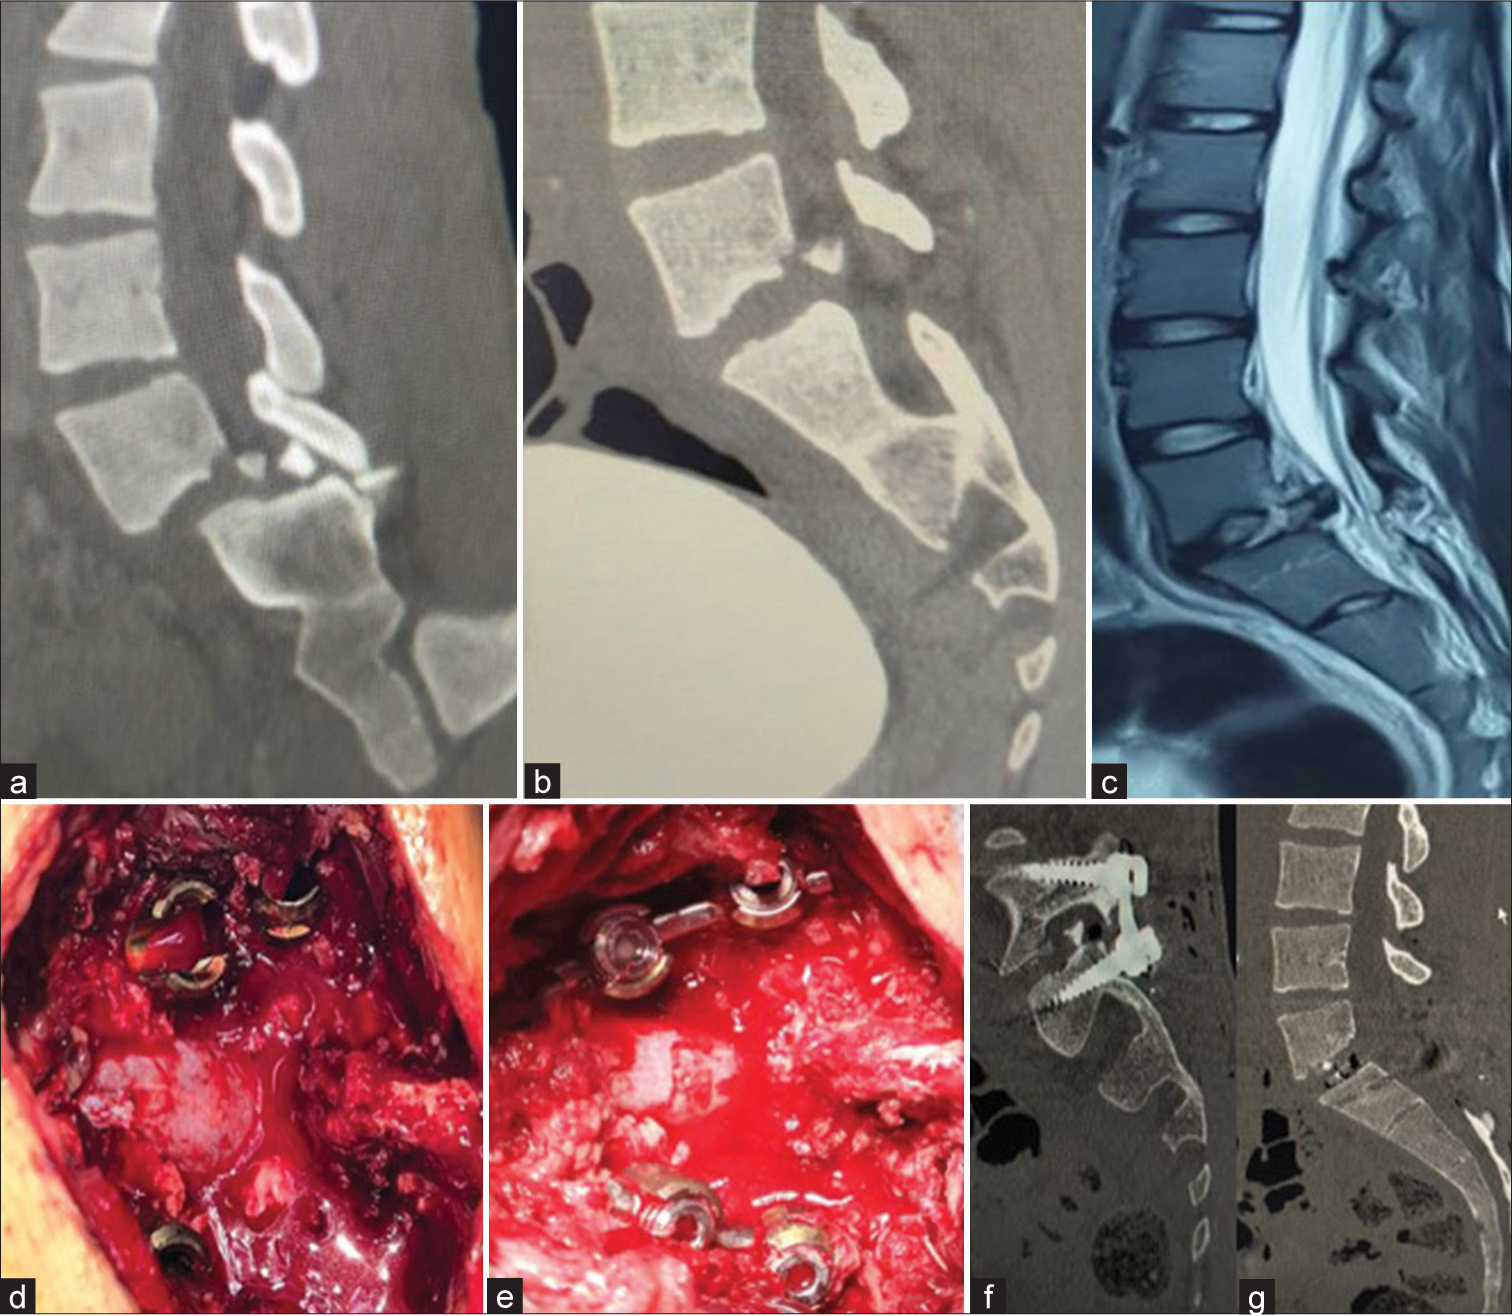 Traumatic lumbar spondylolisthesis: A case report and review of literature